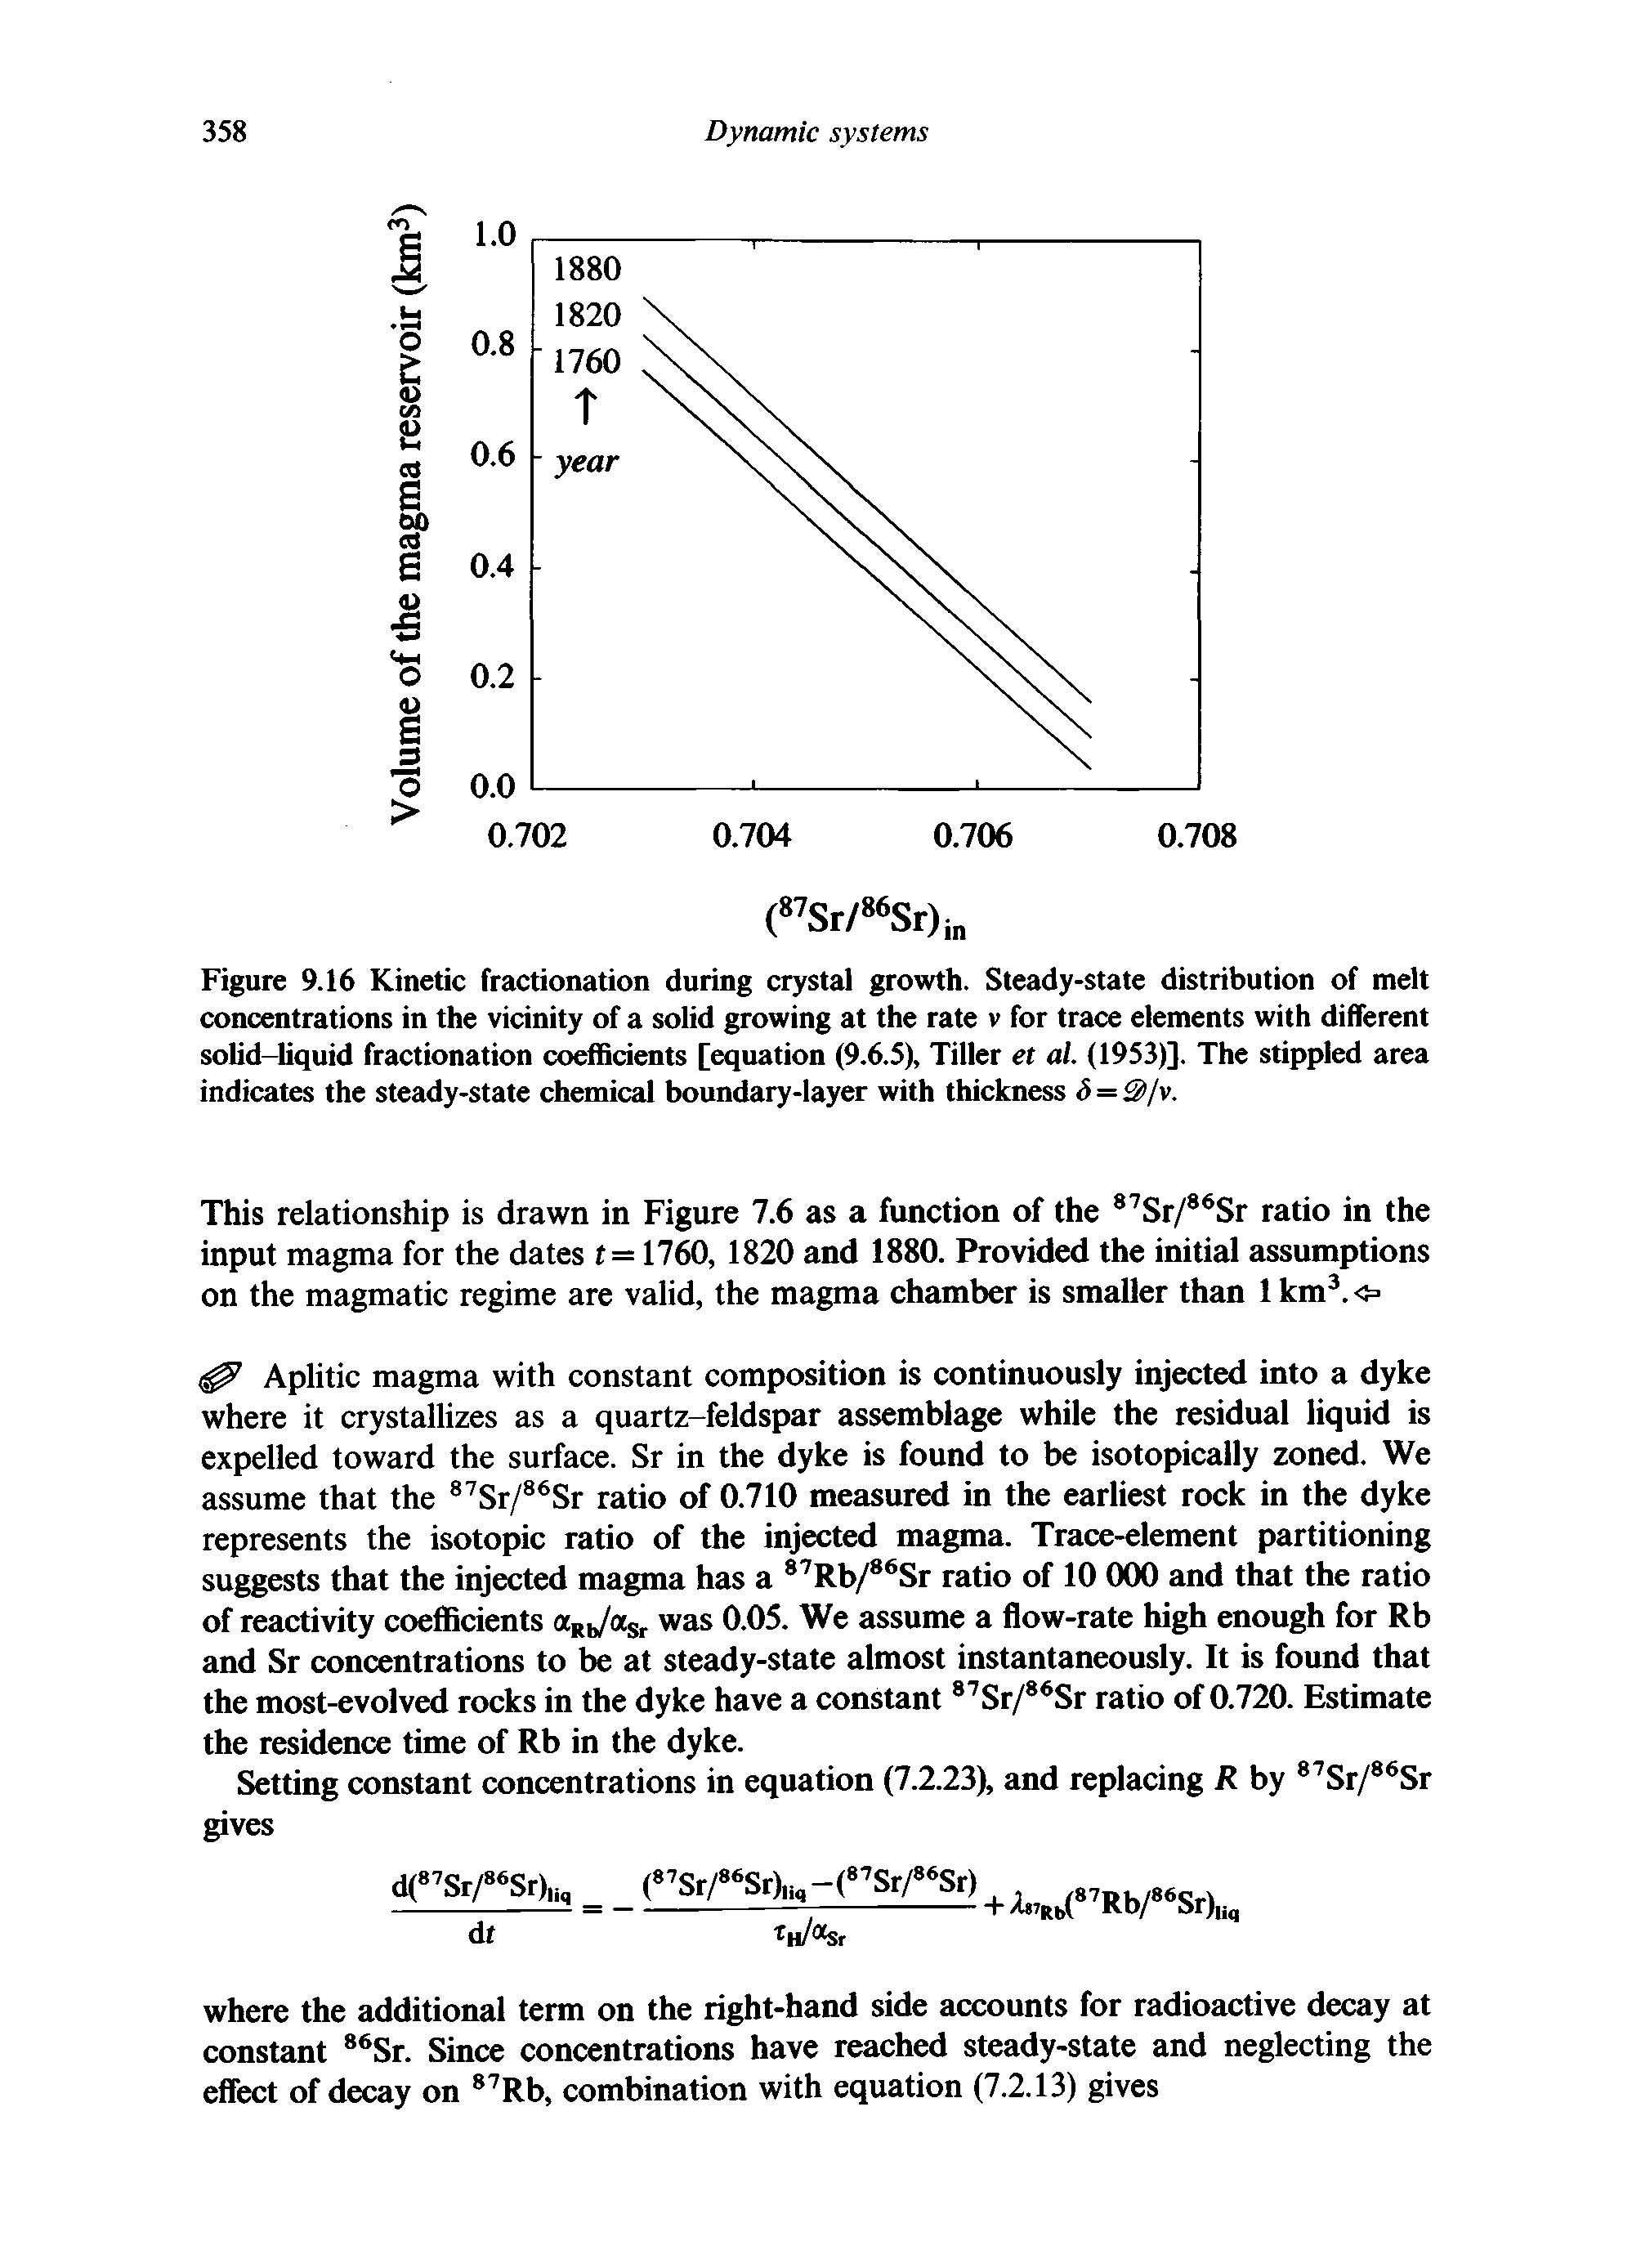 Figure 9.16 Kinetic fractionation during crystal growth. Steady-state distribution of melt concentrations in the vicinity of a solid growing at the rate v for trace elements with different solid-liquid fractionation coefficients [equation (9.6.5), Tiller et al. (1953)]. The stippled area indicates the steady-state chemical boundary-layer with thickness <5 = <5>/v.